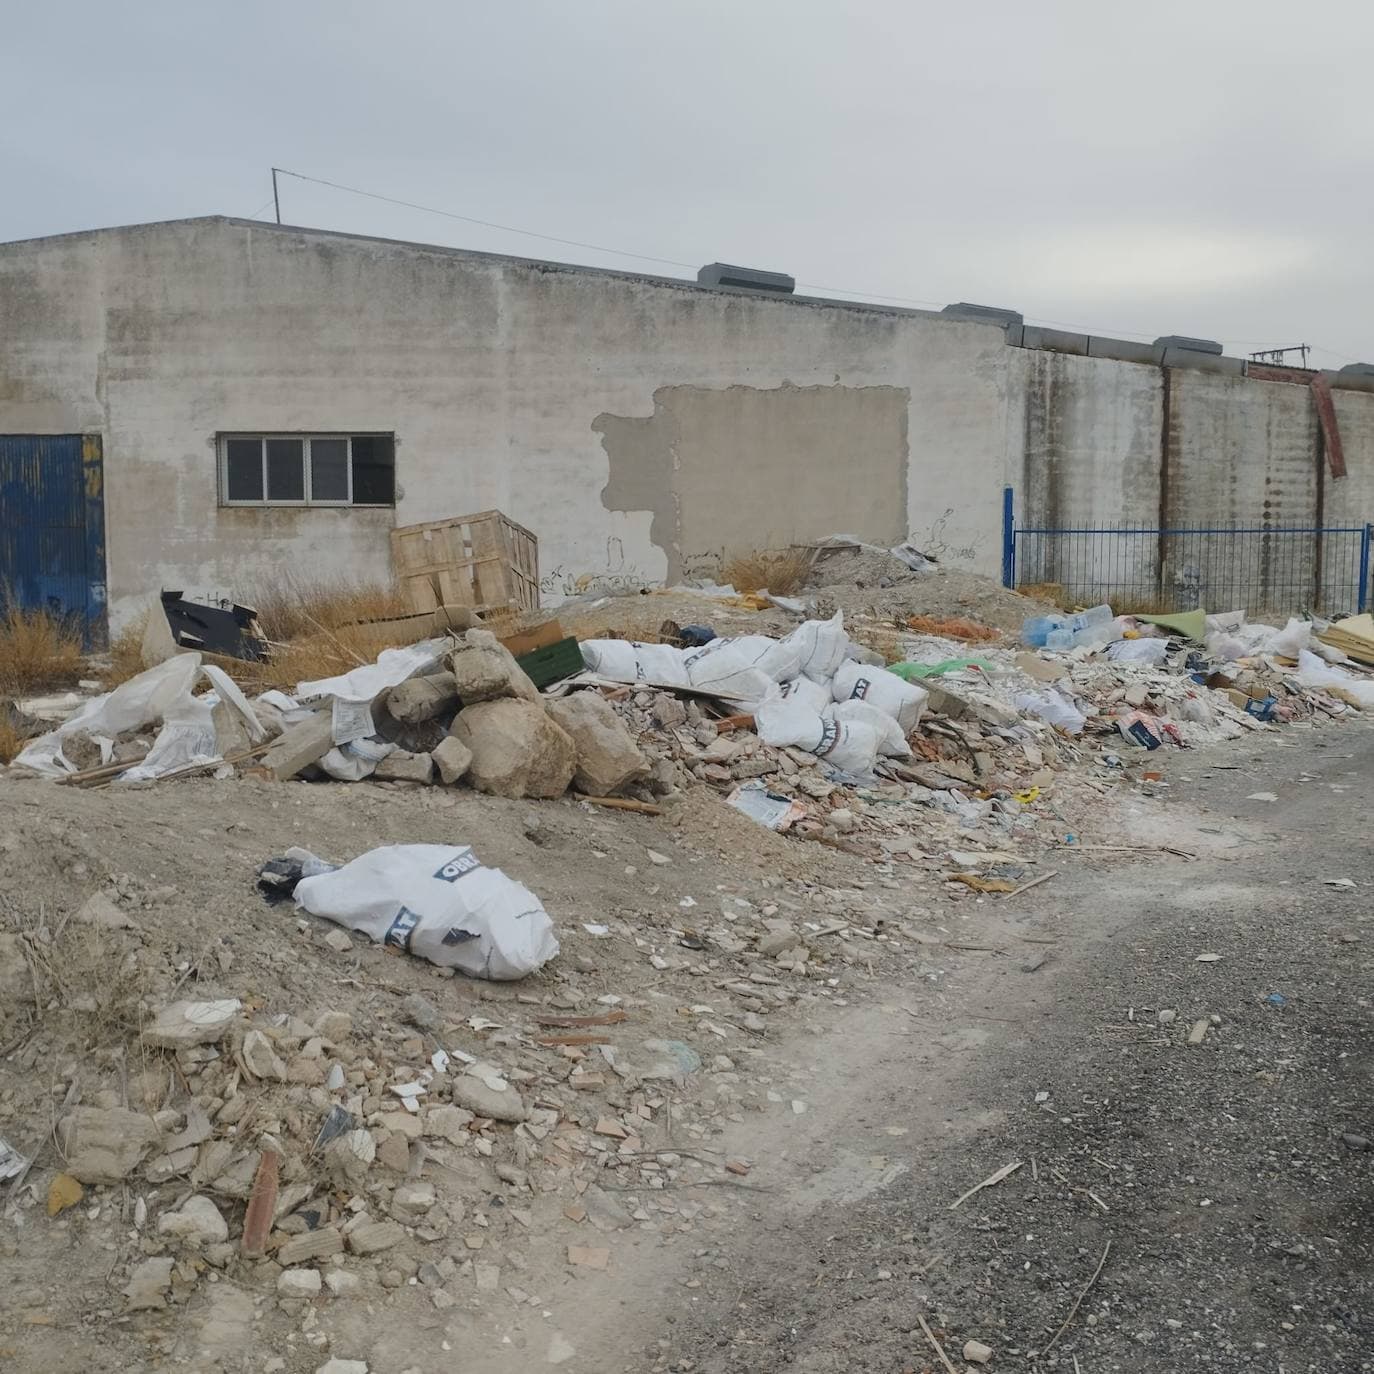 Secondary image 1 - An uncontrolled landfill road located near the El Tapiado industrial estate